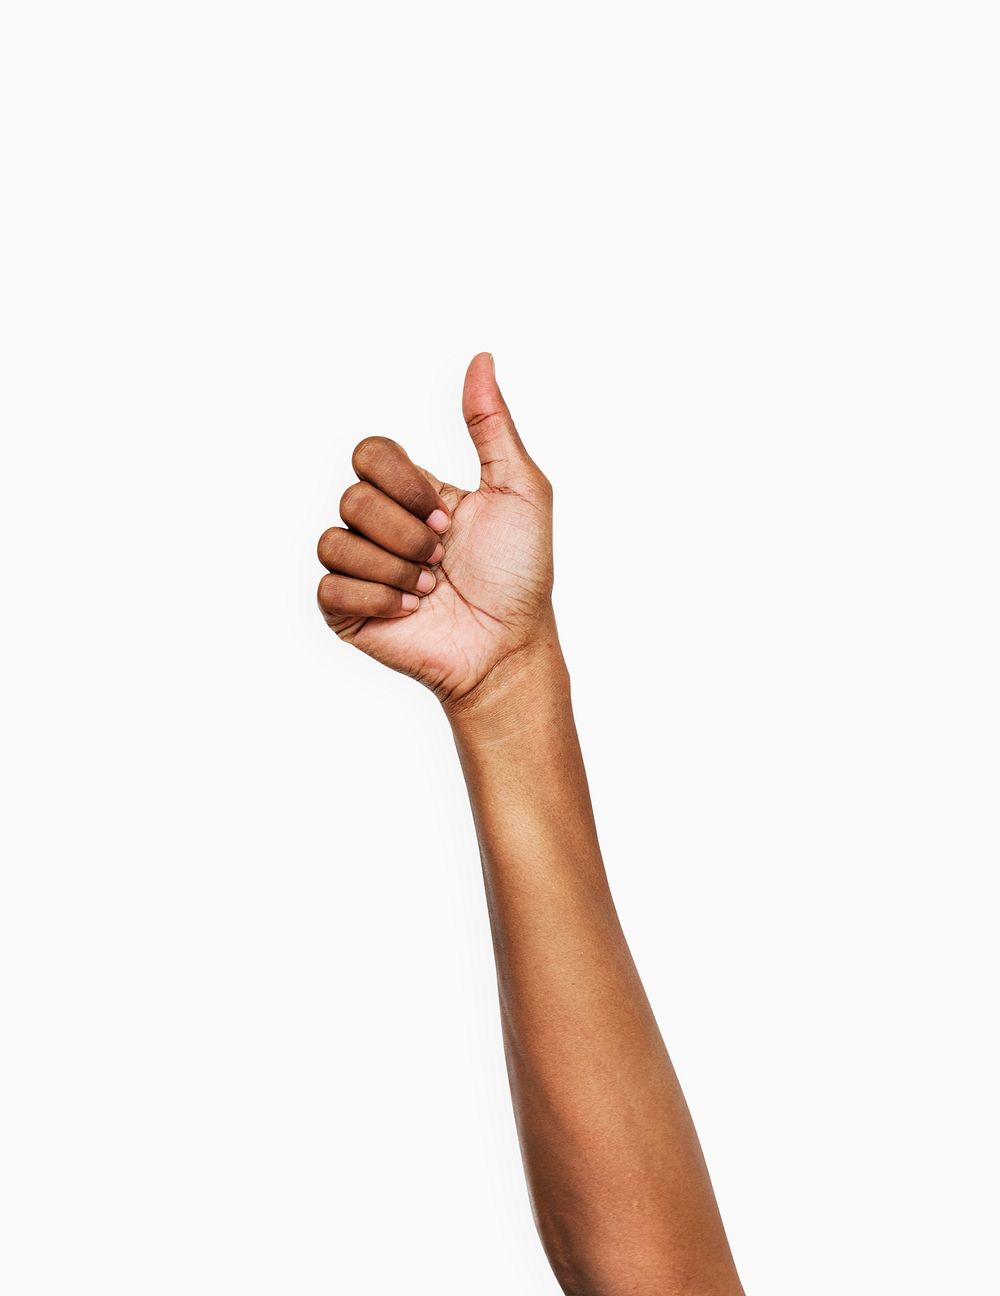 Hands with thumbs up gesture